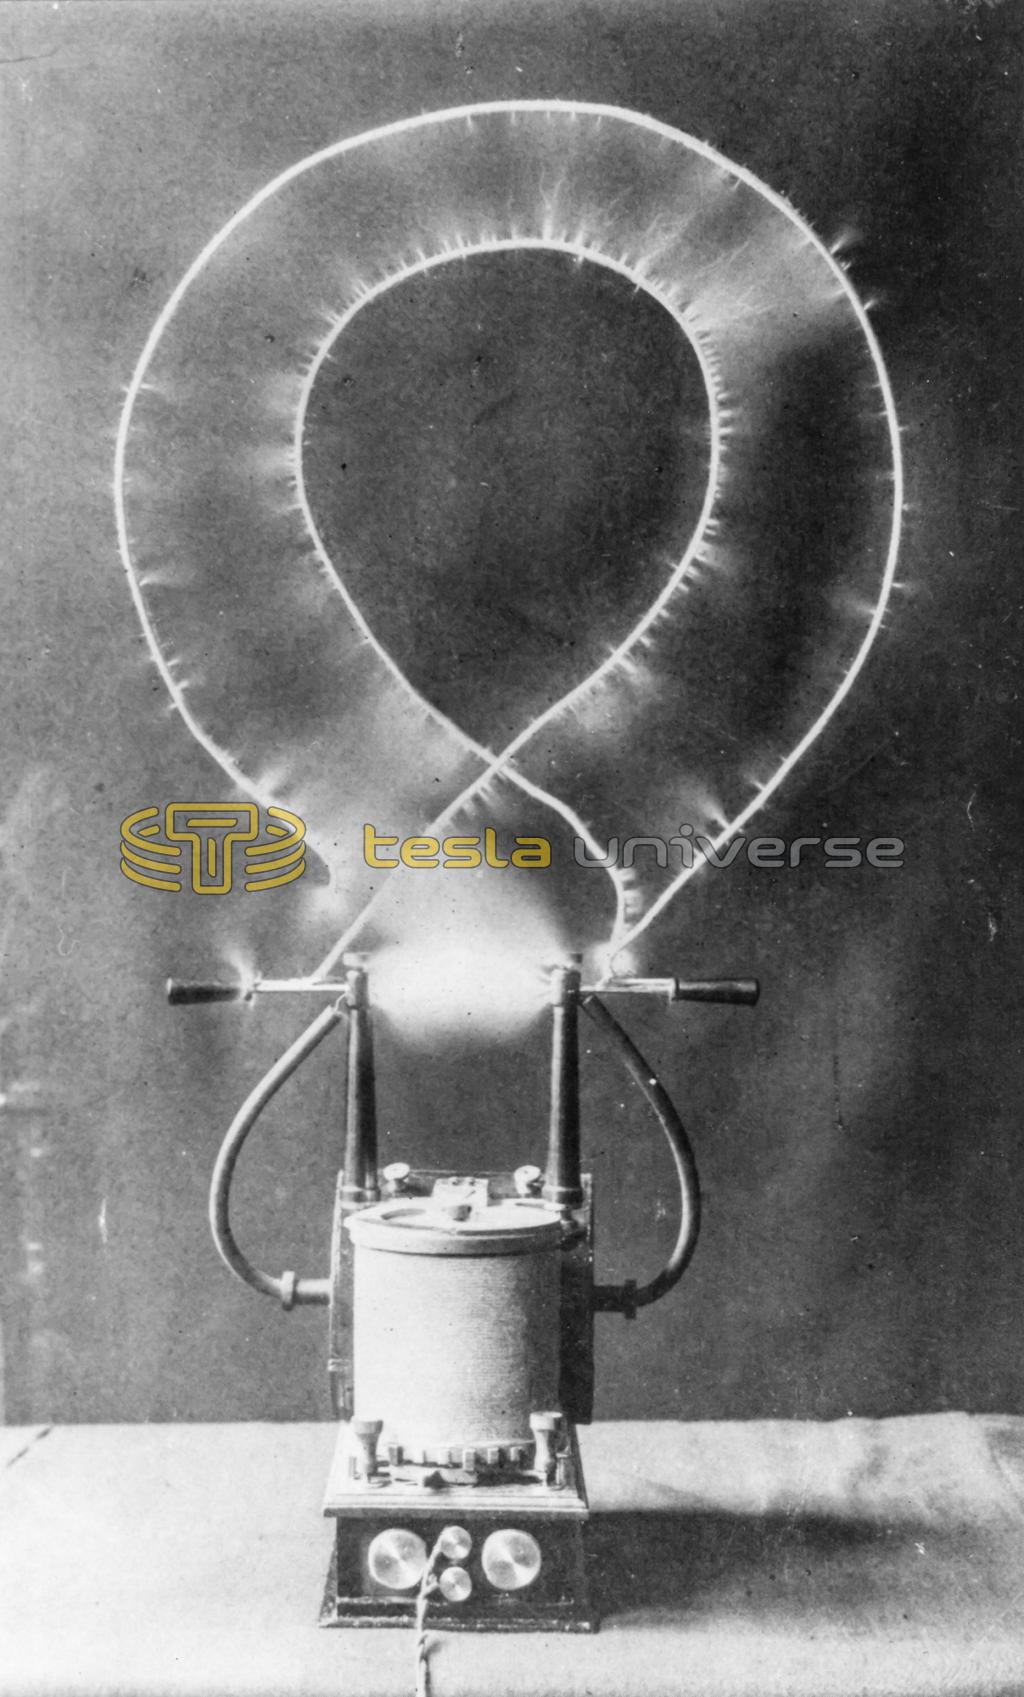 My Inventions IV - The Discovery of the Tesla Coil and Transformer